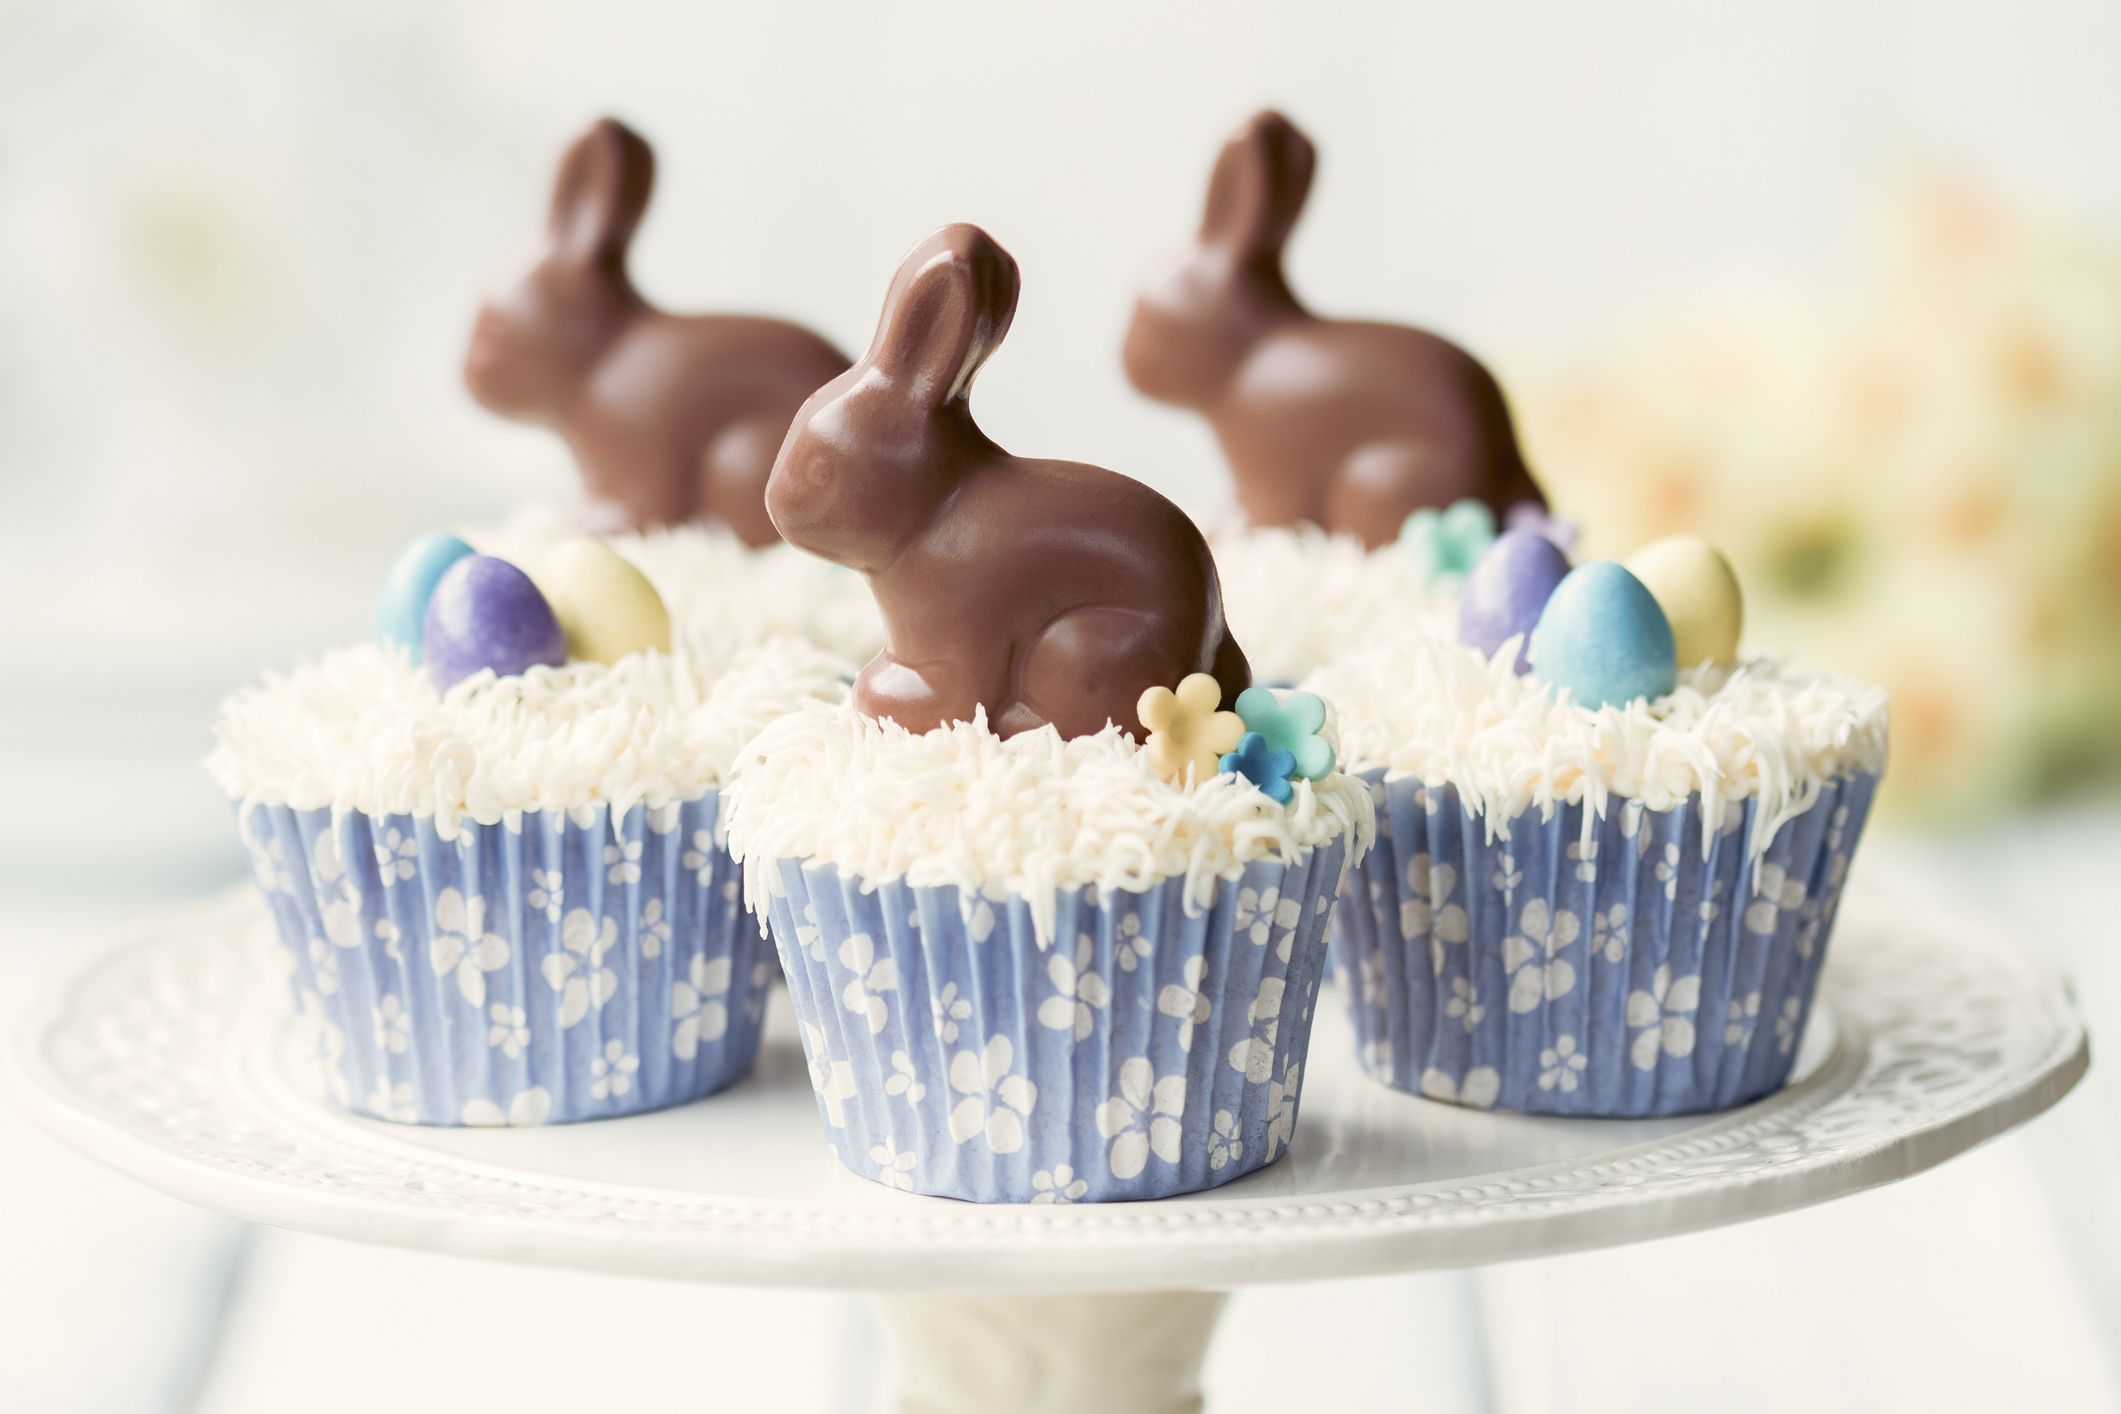 10 decorating easter cupcakes ideas for a festive dessert table